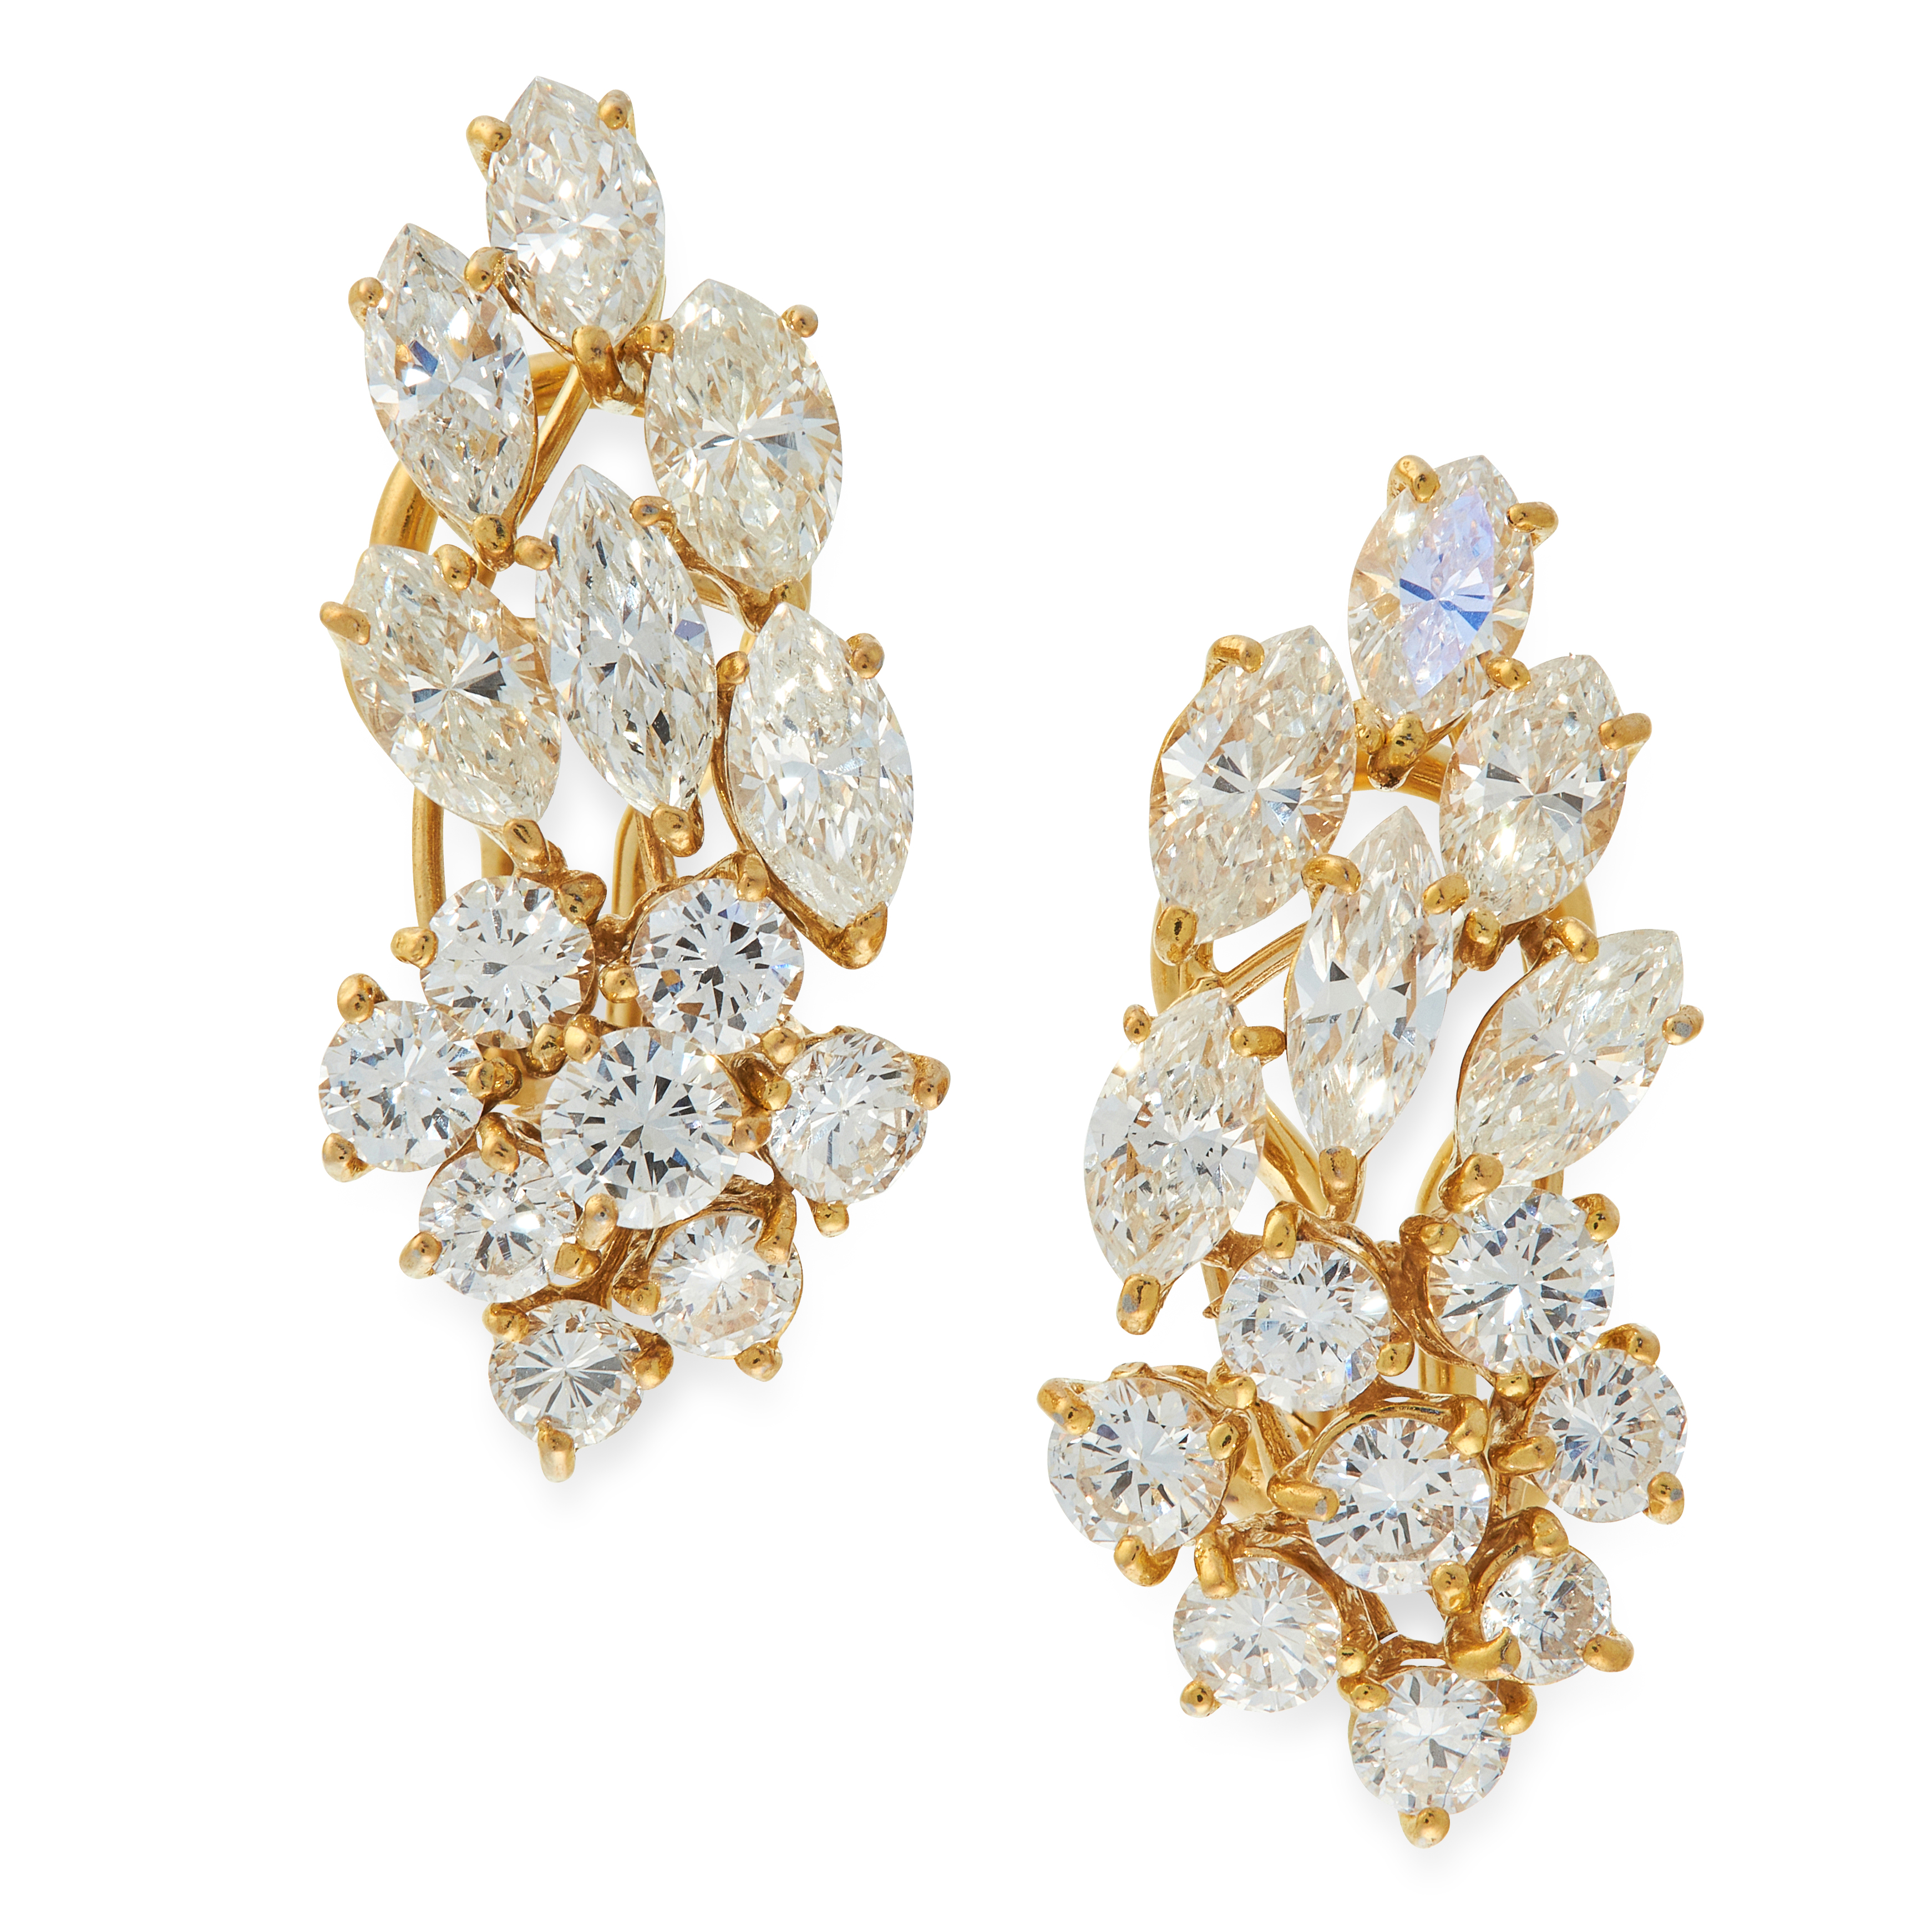 A DIAMOND BROOCH / PENDANT AND EARRINGS SUITE in yellow gold, each of foliate design, set with - Image 2 of 2